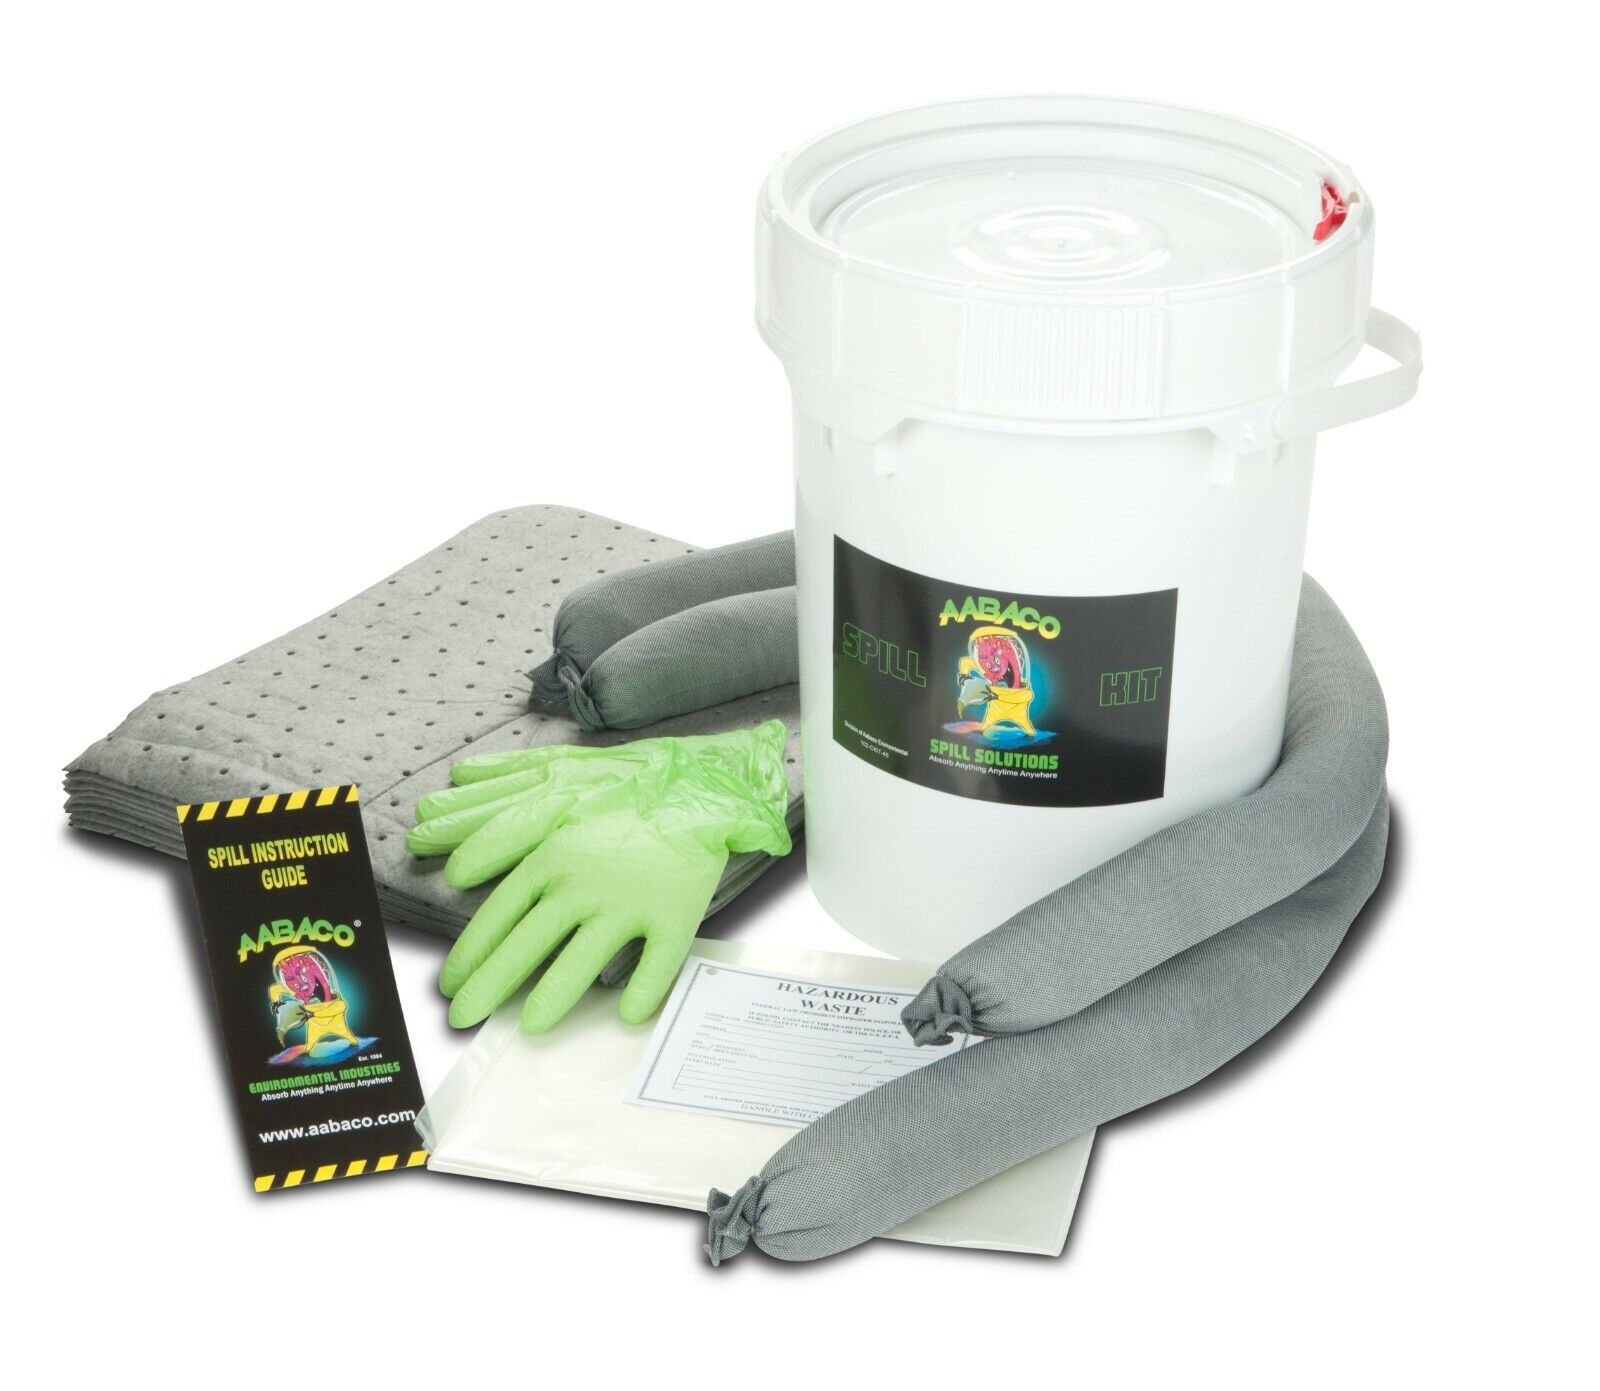 Universal Spill KIT in Bucket Perfect Spill Kits for Trucks - Chemical or Oil - 5 Gallon